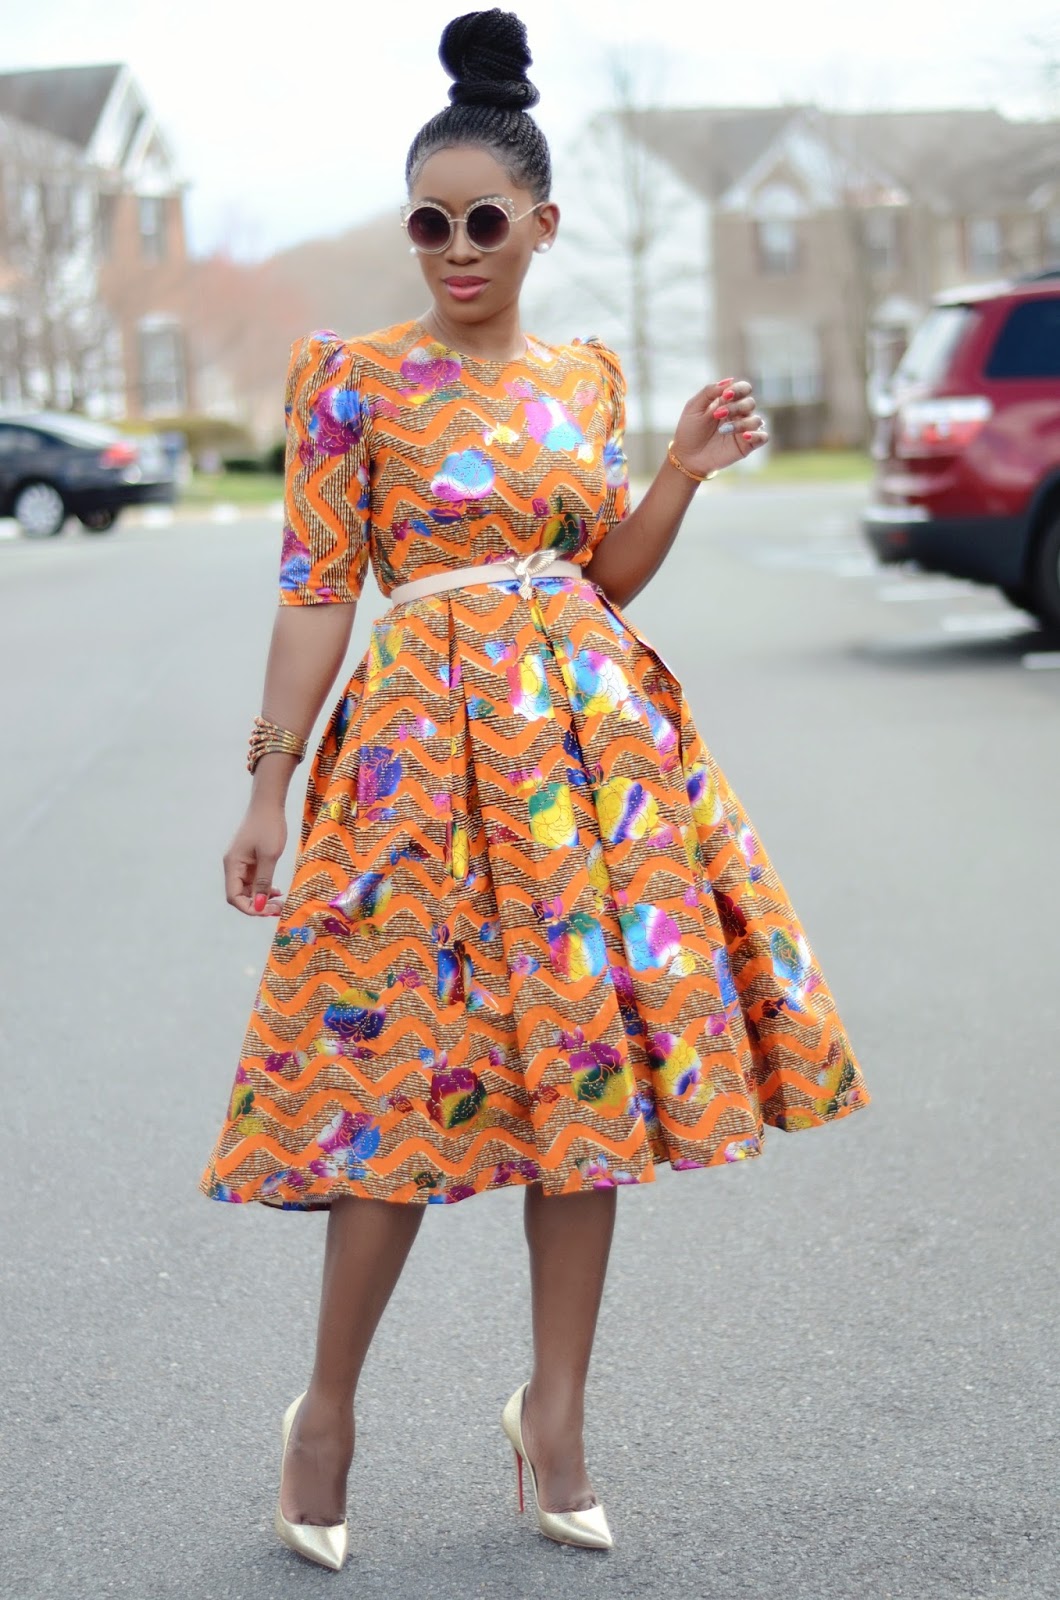 Living My Bliss InStyle: African Print Dress